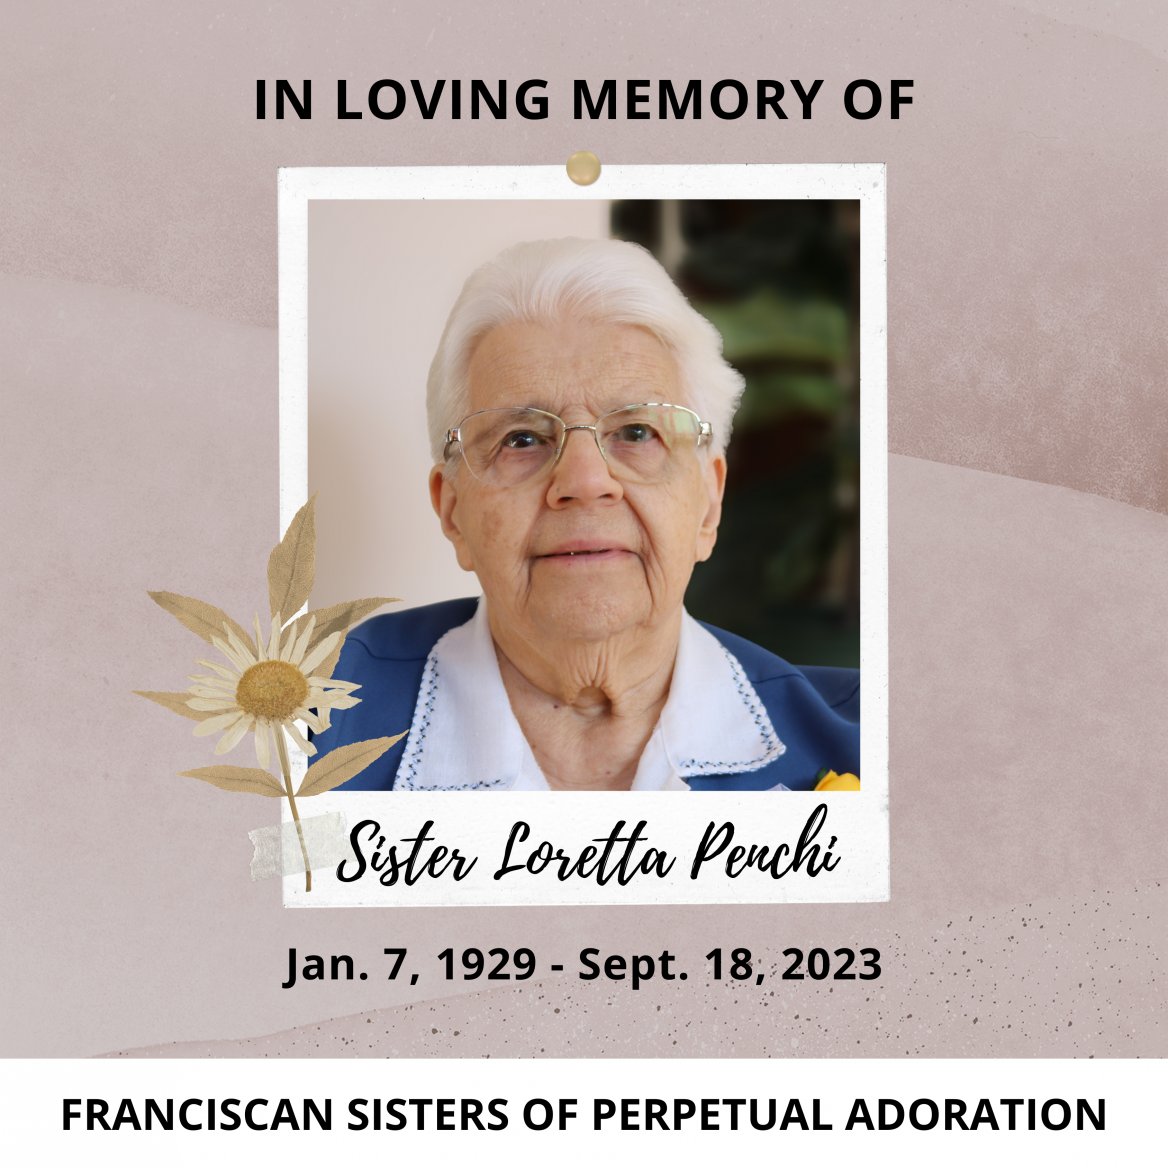 In loving memory of Franciscan Sister of Perpetual Adoration Loretta  Penchi with flower graphic and portrait